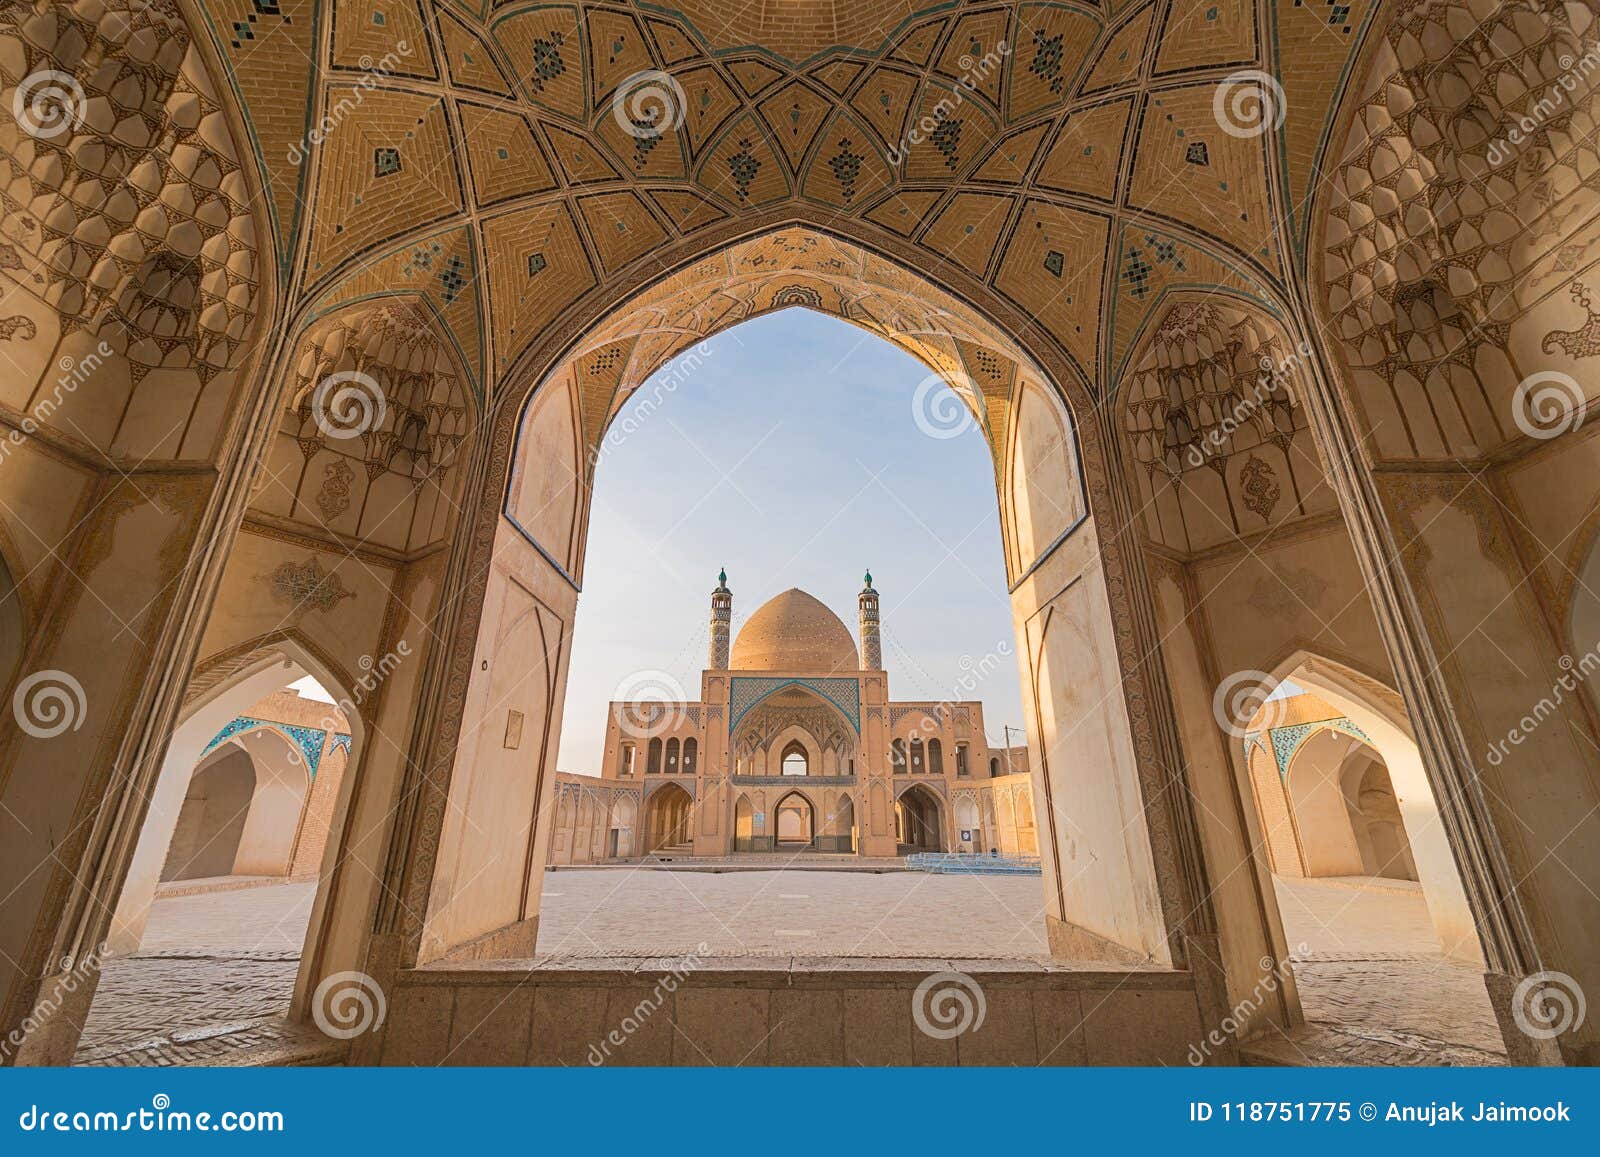 about agha bozorg mosque in kashan, iran